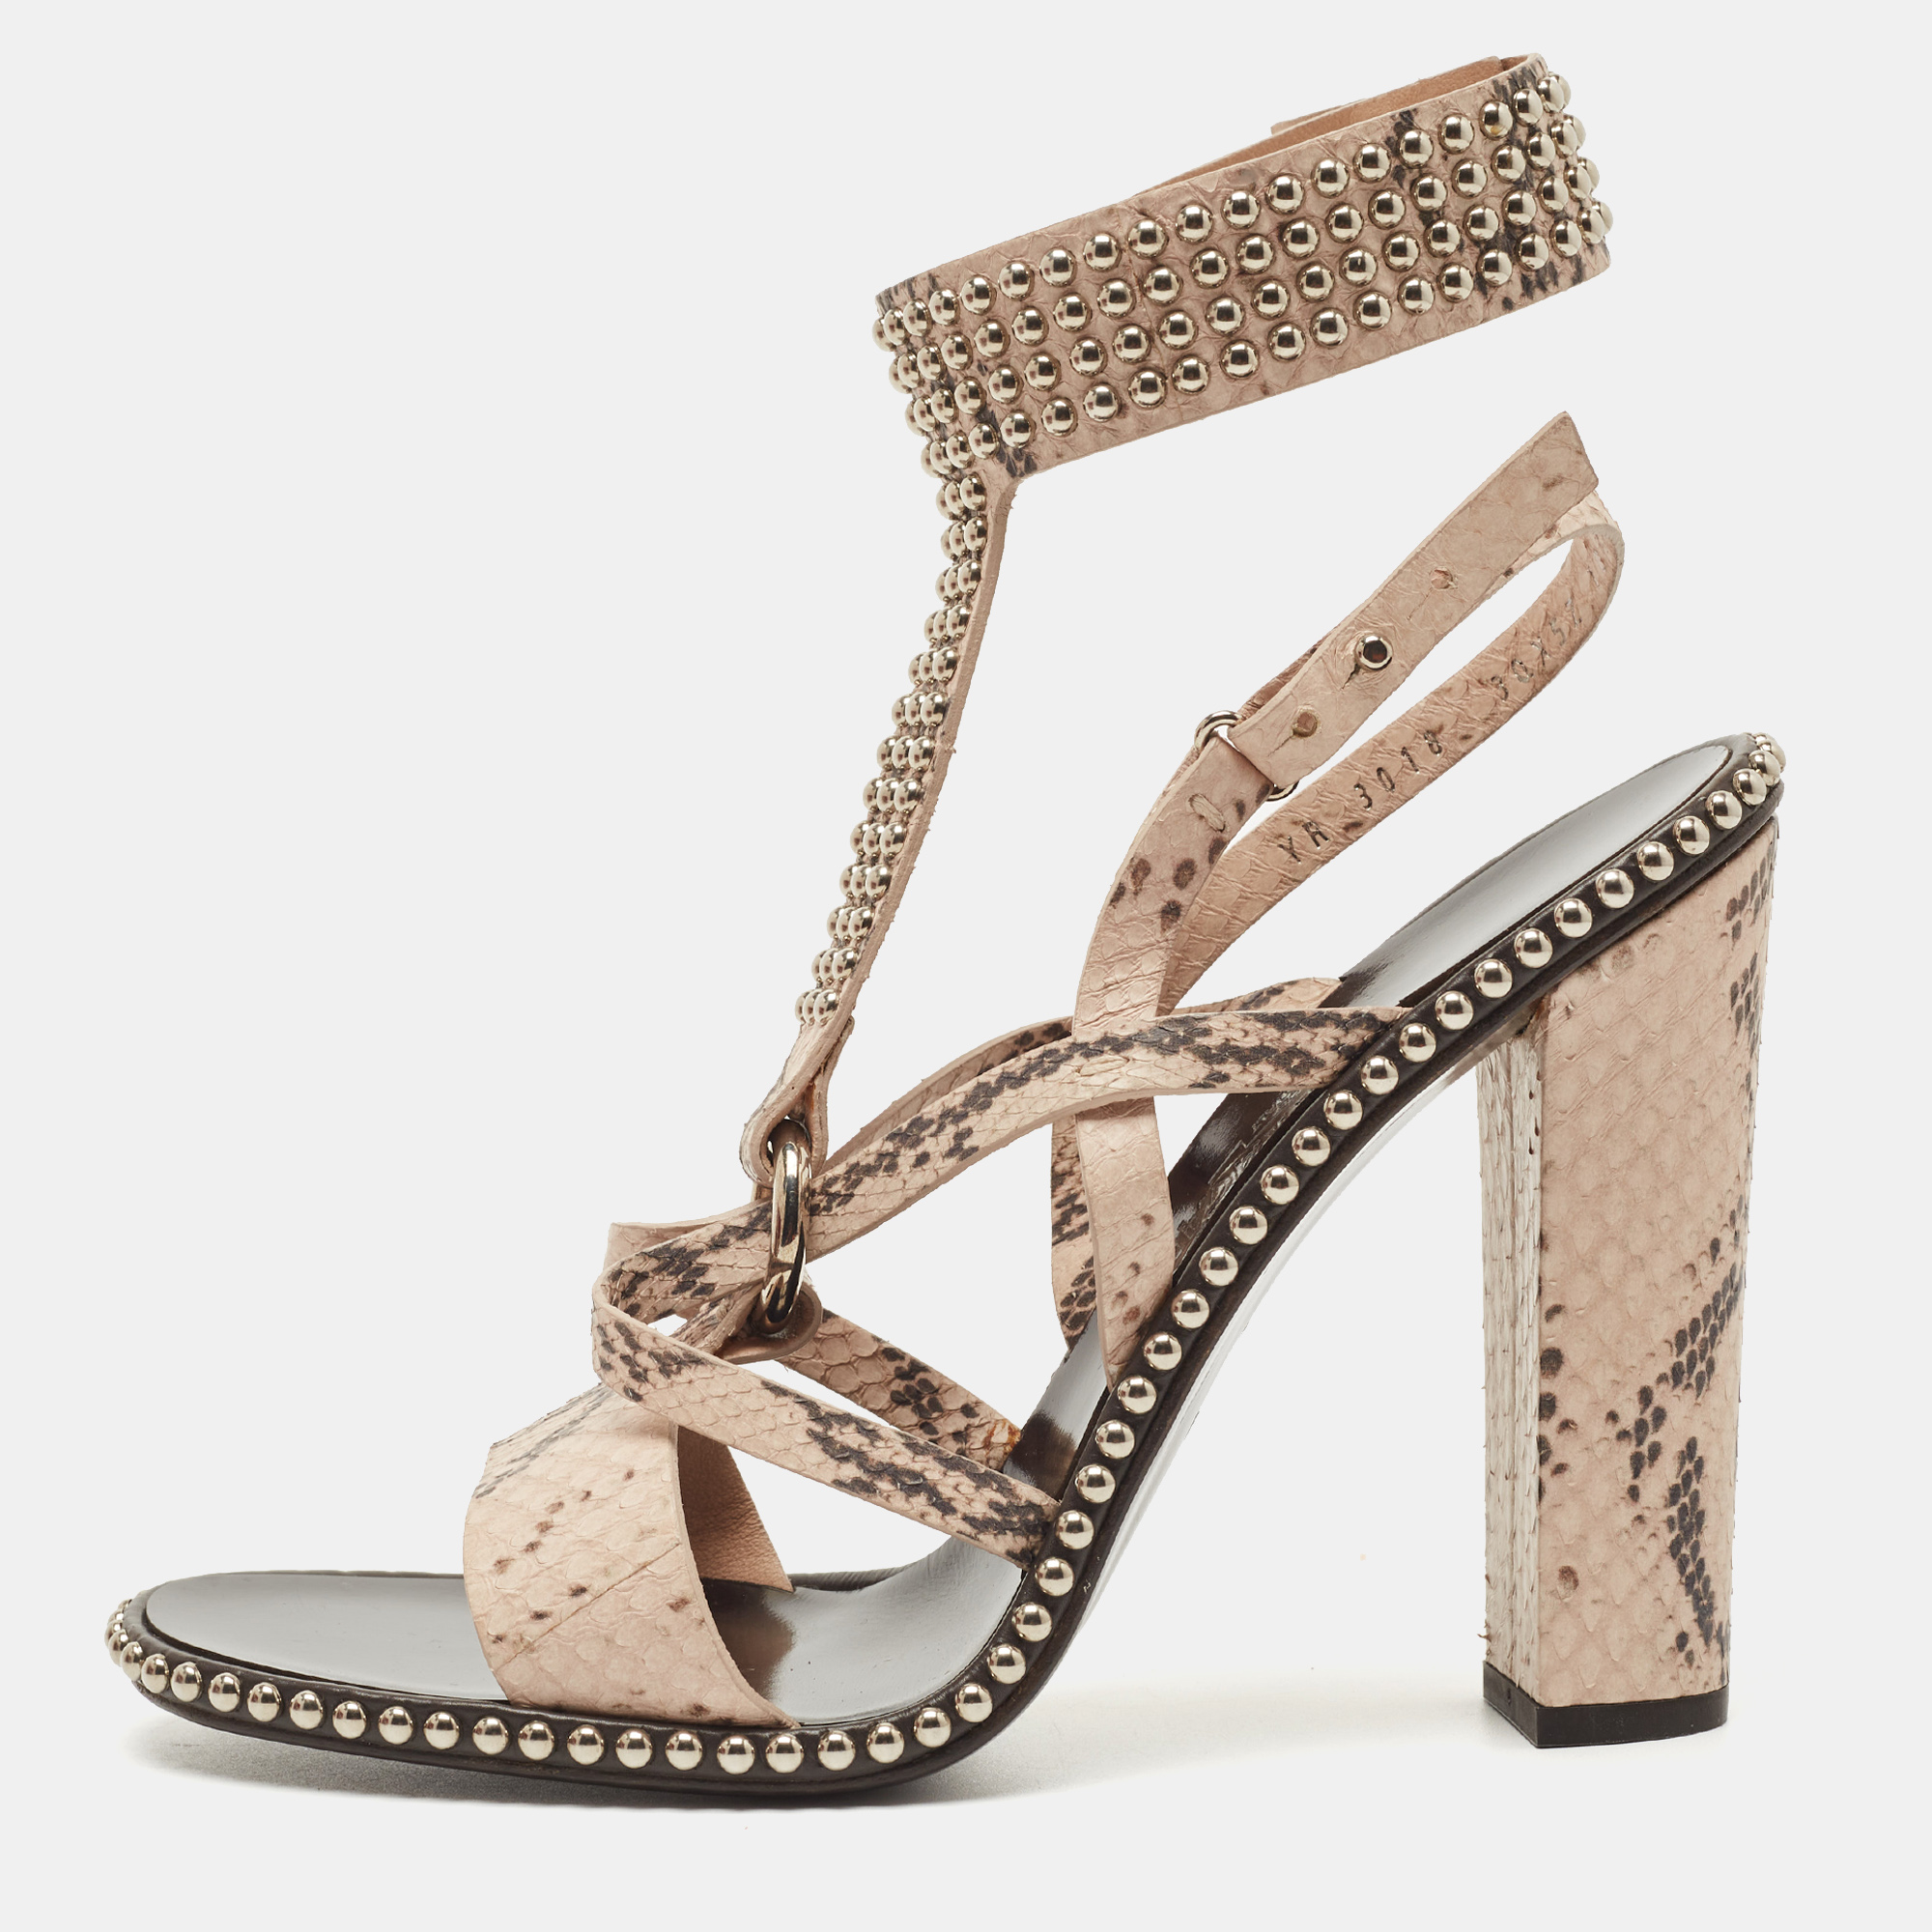 Pre-owned Ferragamo Beige Python Leather Studded Ankle Cuff Sandals Size 41